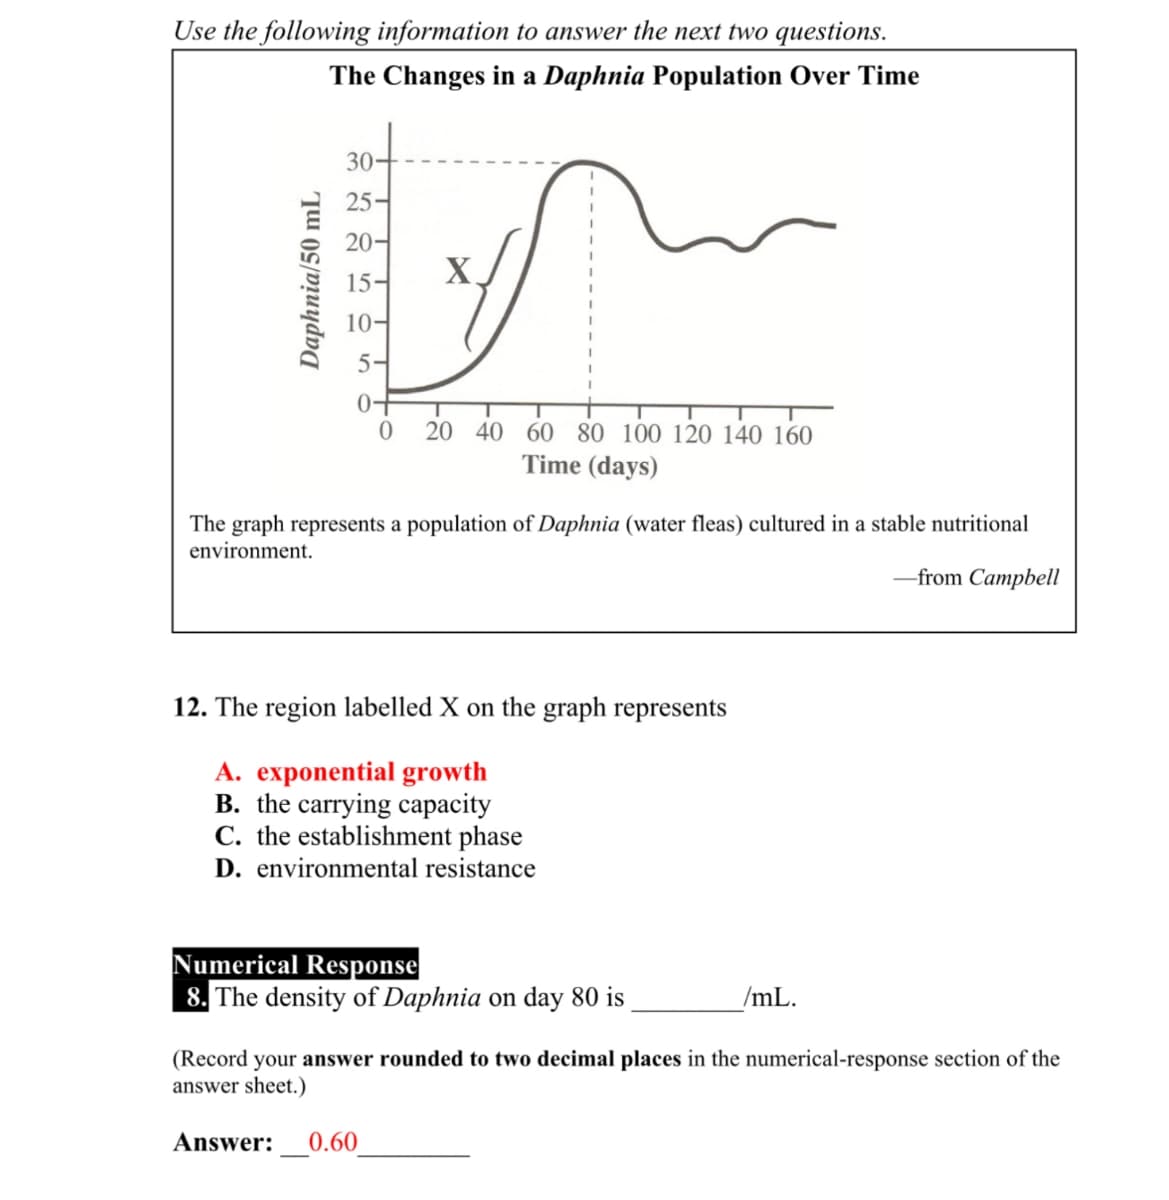 Use the following information to answer the next two questions.
The Changes in a Daphnia Population Over Time
Daphnia/50 mL
30-
25-
20-
15-
5.
0+
0 20 40 60 80 100 120 140 160
Time (days)
The graph represents a population of Daphnia (water fleas) cultured in a stable nutritional
environment.
12. The region labelled X on the graph represents
A. exponential growth
B. the carrying capacity
C. the establishment phase
D. environmental resistance
-from Campbell
Numerical Response
8. The density of Daphnia on day 80 is
/mL.
(Record your answer rounded to two decimal places in the numerical-response section of the
answer sheet.)
Answer: 0.60